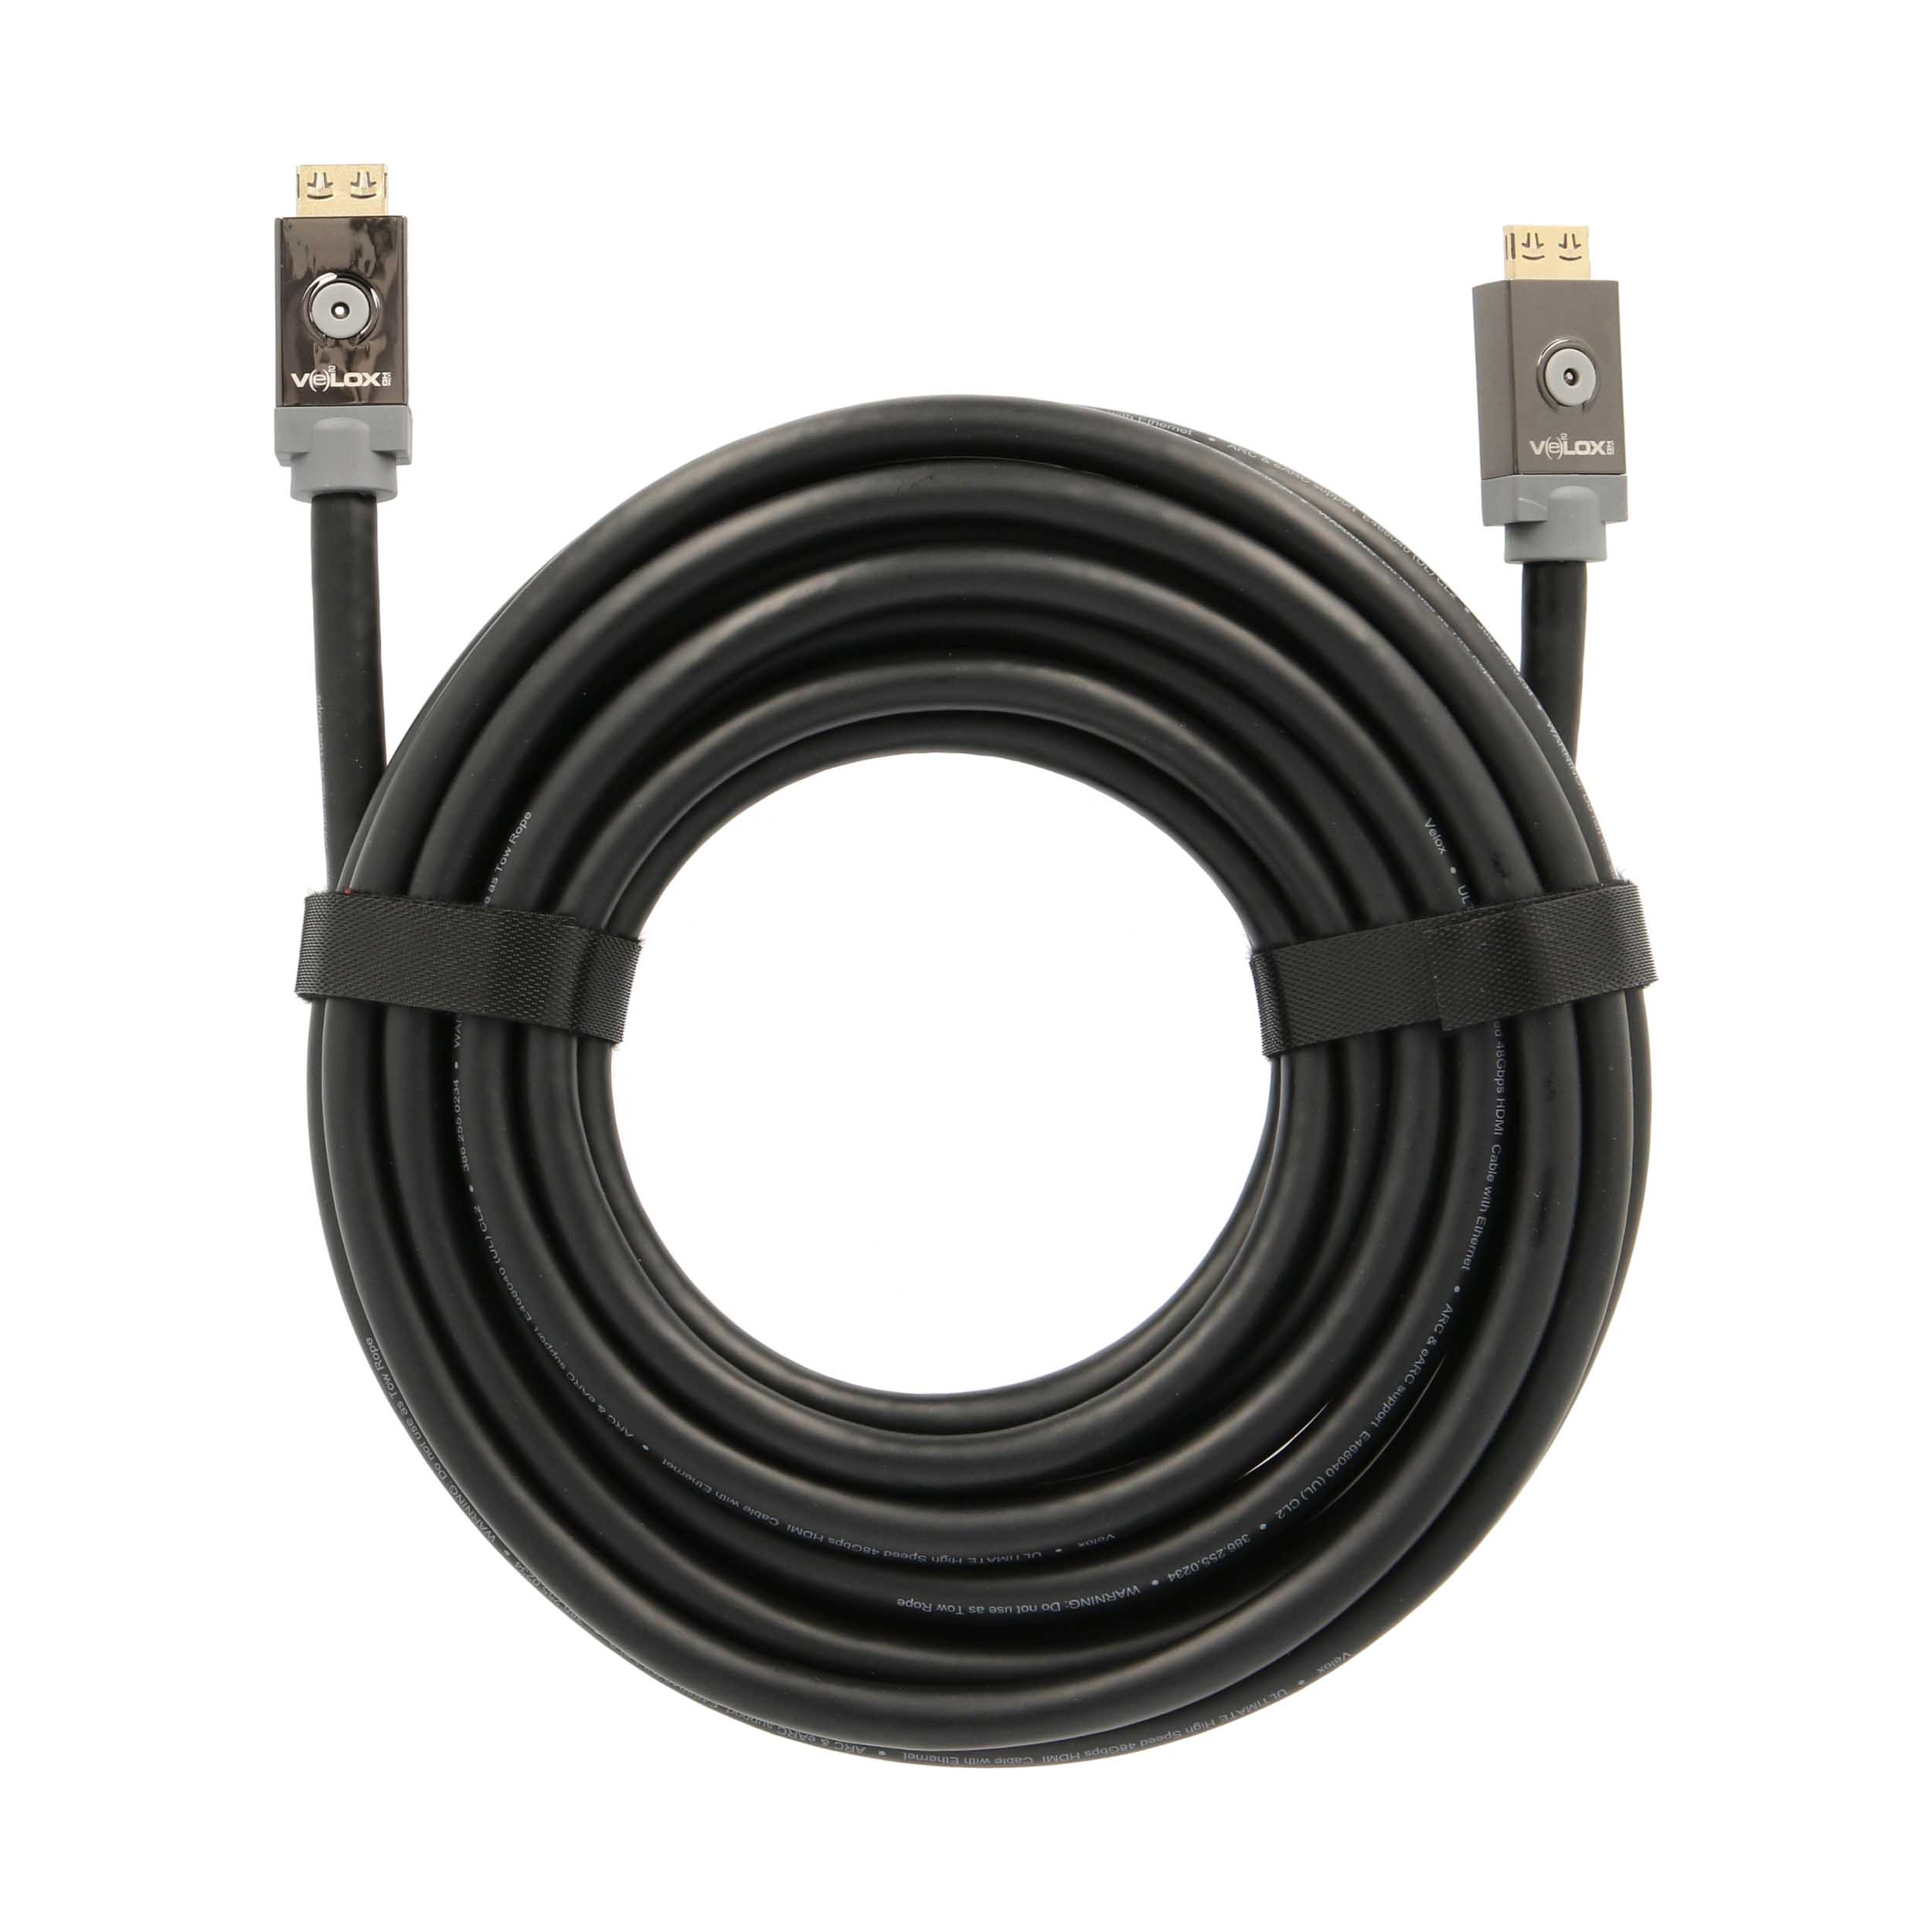 EHV-HDUP8 - 8M Passive HDMI Cable 179